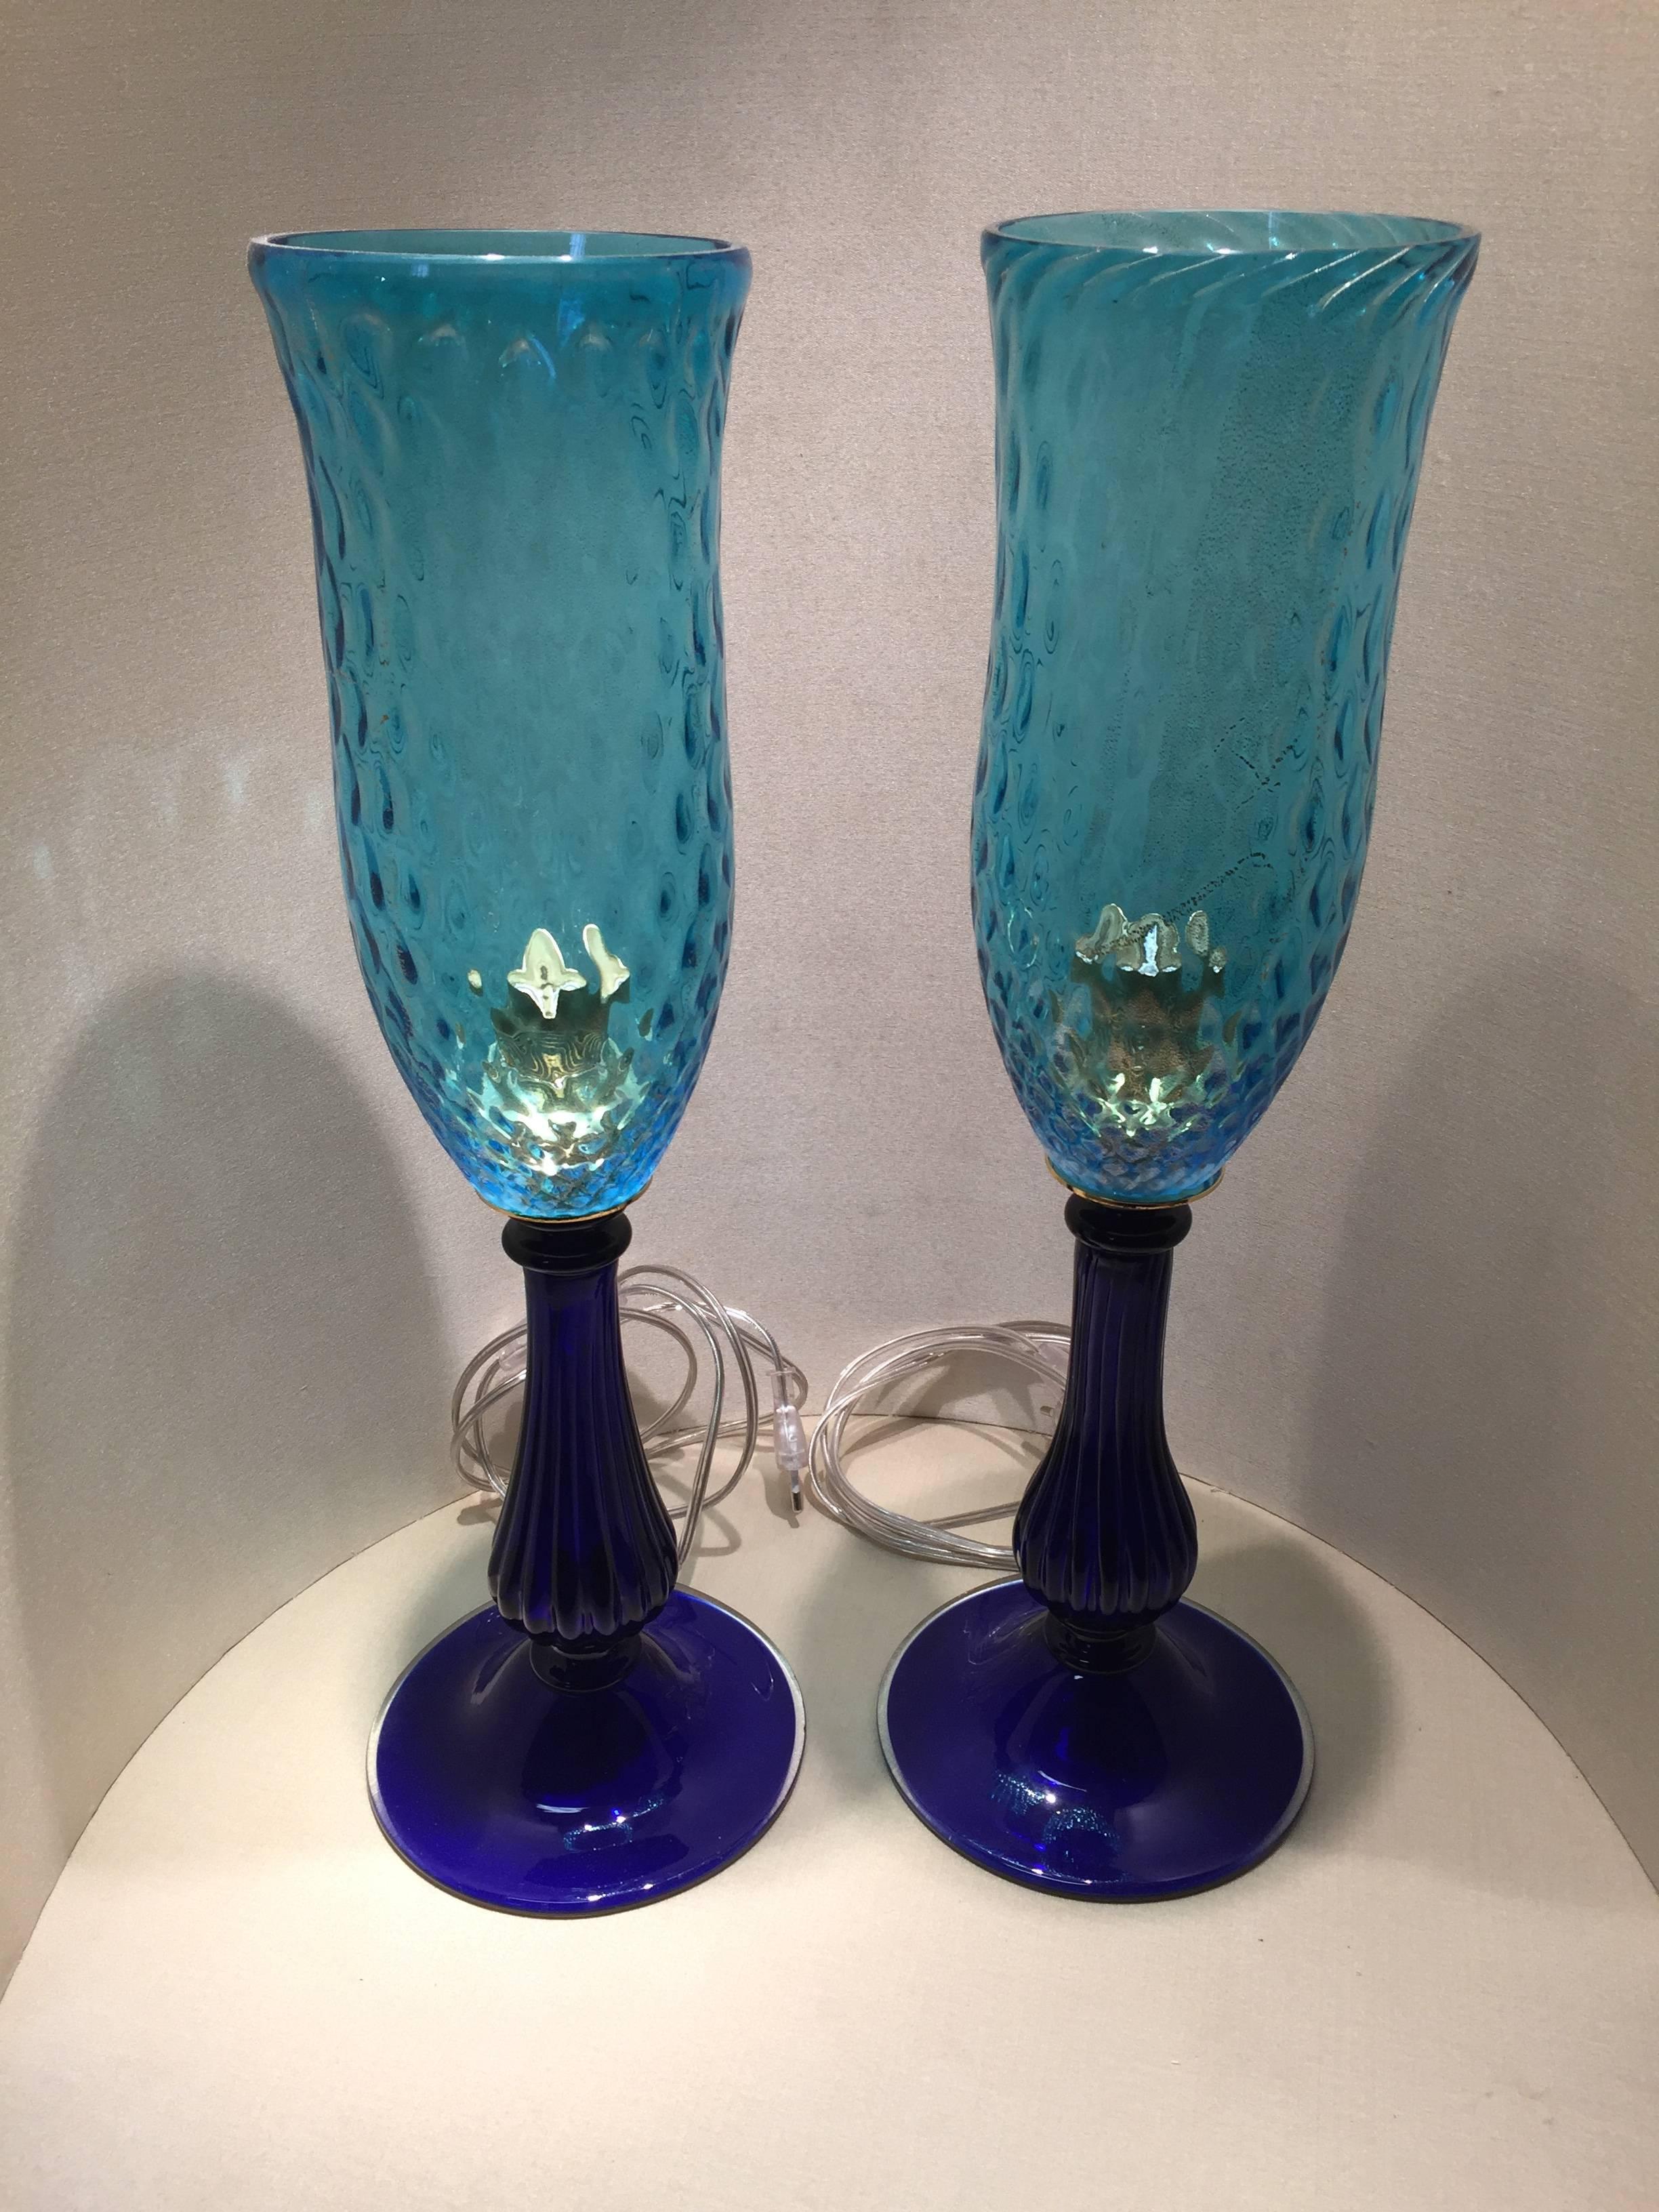 A very nice couple of lamps with aquamarine color Murano glass shades on cobalt blue blown glass fluted foot.